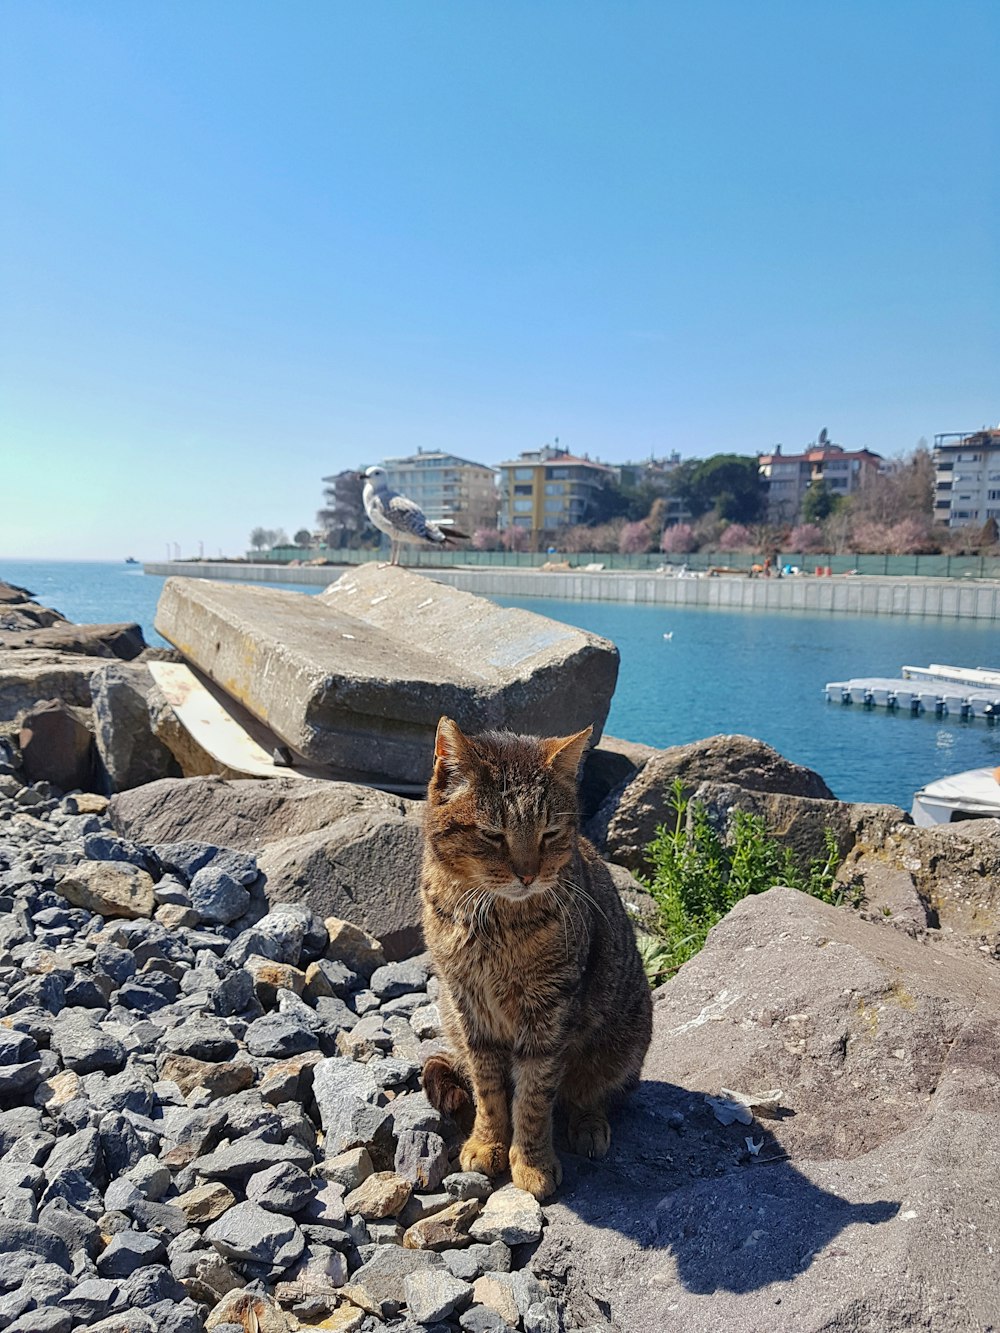 a cat sitting on a rock near a body of water